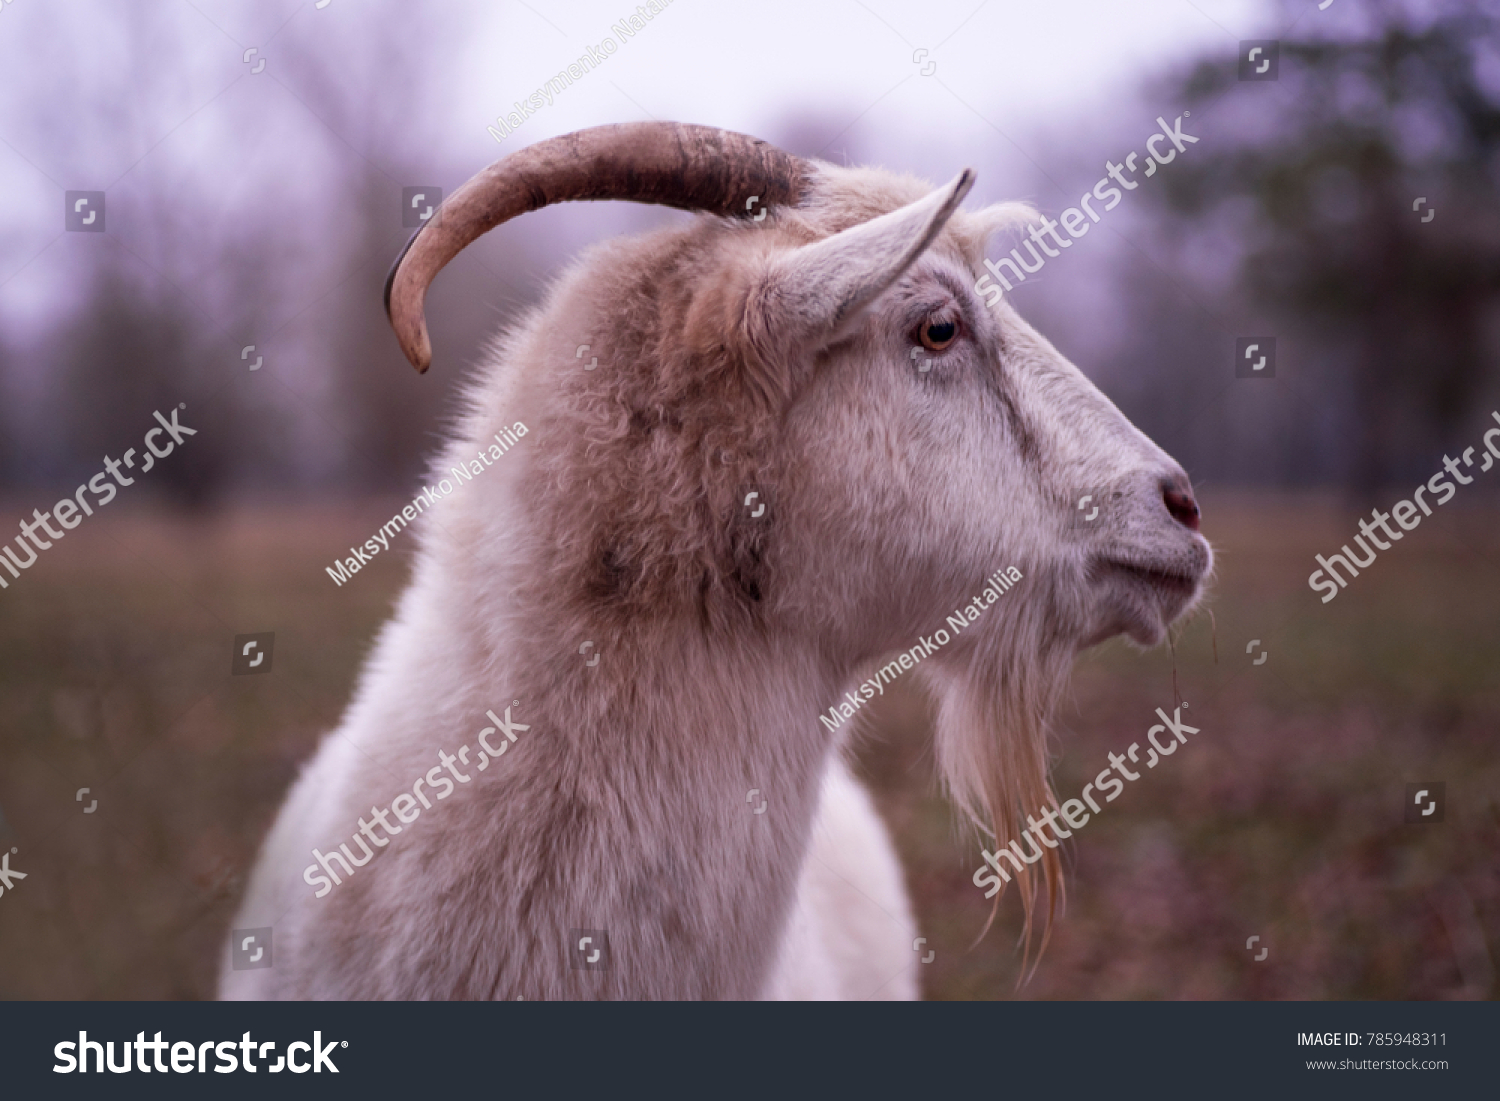 White goat, head of a goat #785948311